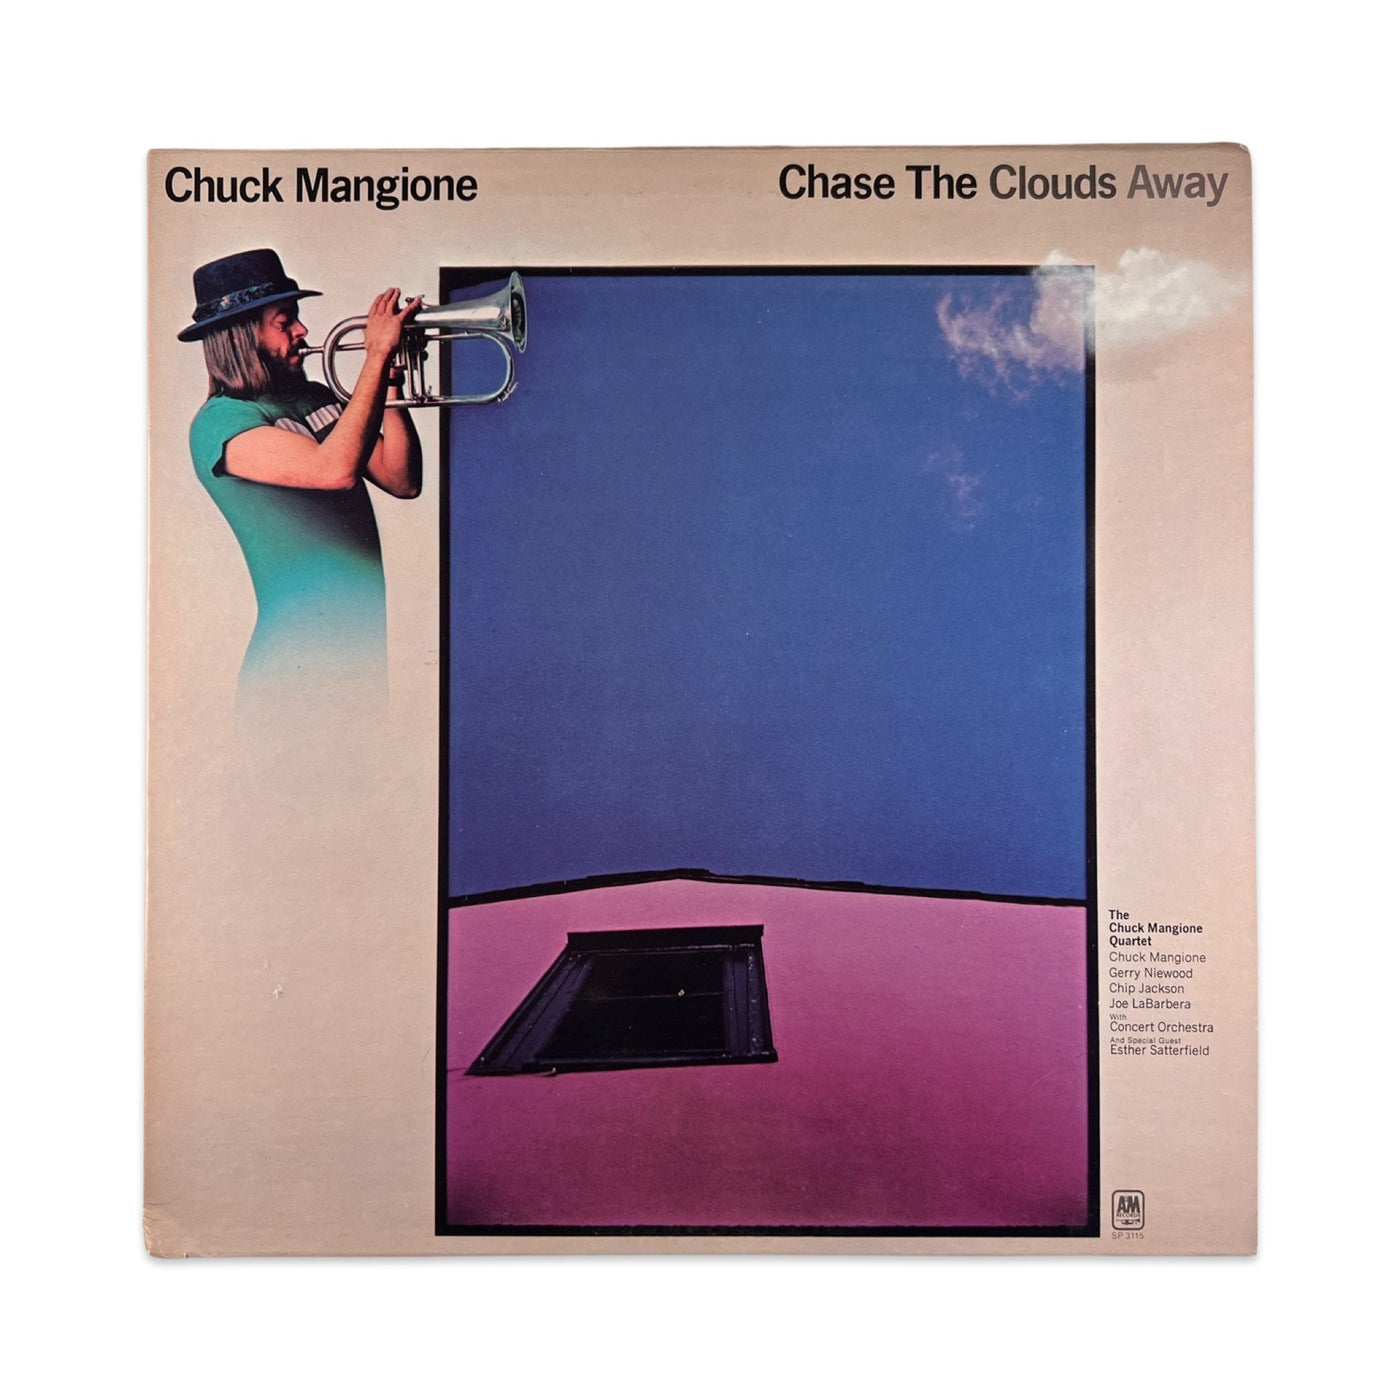 Chuck Mangione, Chuck Mangione Quartet – Chase The Clouds Away